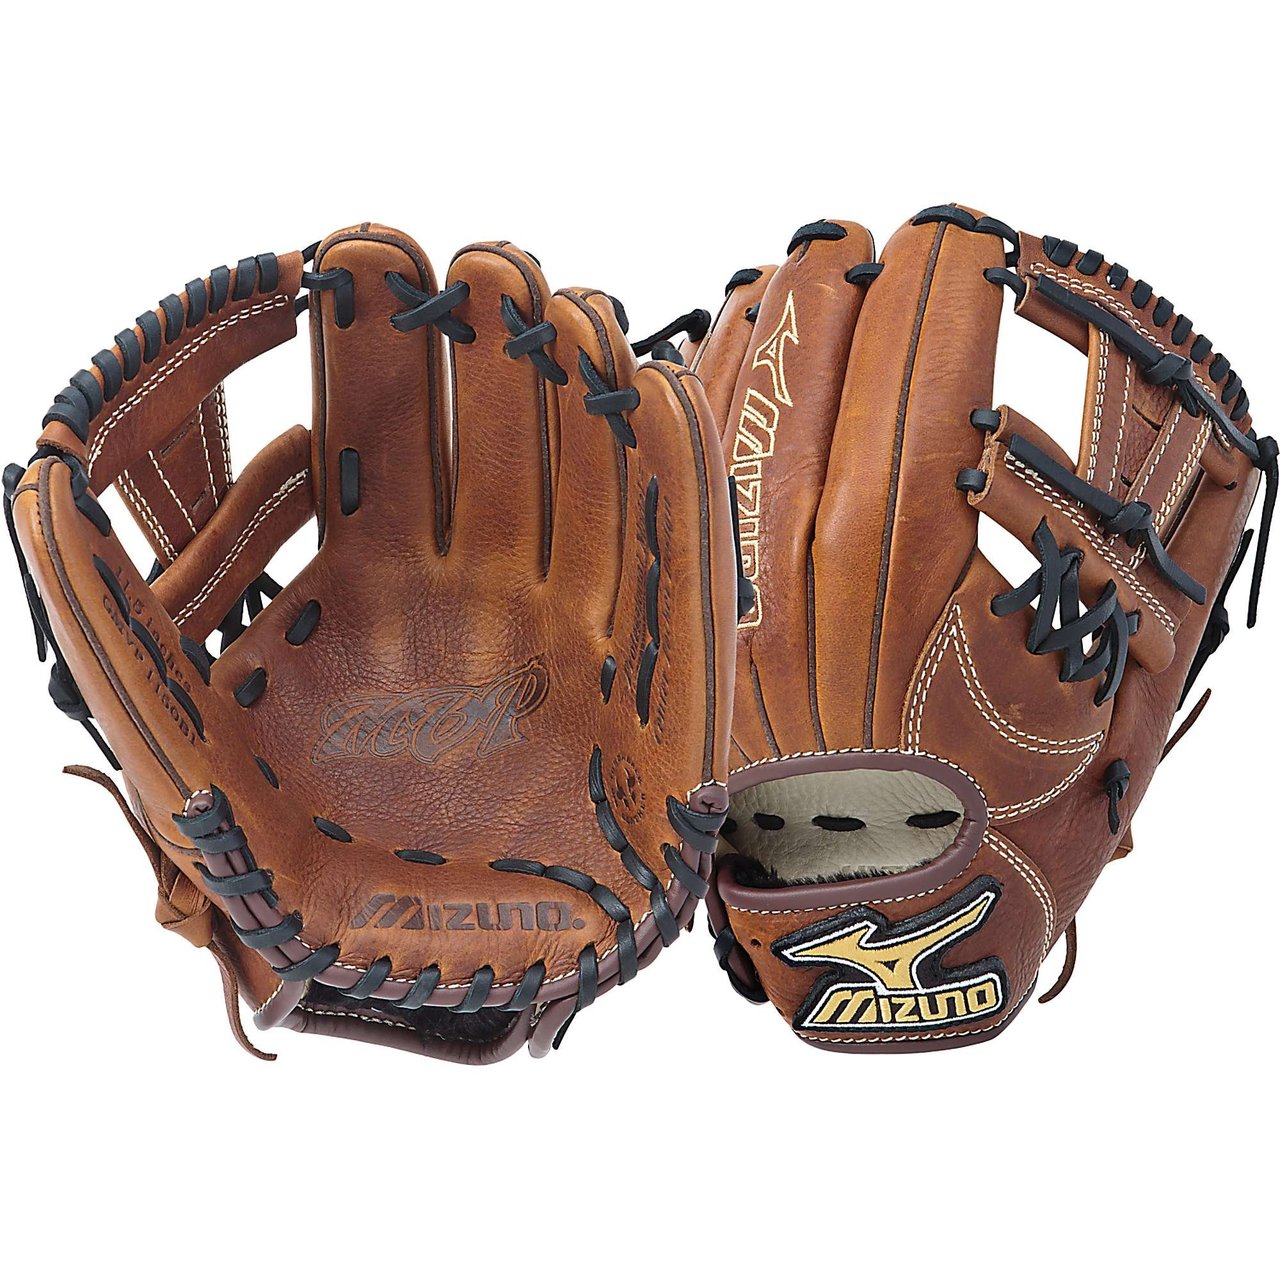 The Mizuno GMVP1150B1 is an 11.50-Inch infielder's glove made from soft Bio Throwback leather and is game ready. Center Pocket designed pattern offers the most versatile break-in possible. Soft, pebbled, Bio Throwback leather for game ready performance and long lasting durability. Ultrasoft palm liner. 11 12 inch baseball infield pattern. Deep 3-V web. The MVP baseball glove line from Mizuno has been an excellent value for baseball players from the day it launched. With the latest updates to the Mizuno MVP glove line, Mizuno is establishing a dynasty on the baseball field. Center Pocket designed patterns make the MVP glove easy to break in. The Soft, pebbled, Bio Trowback leather that is used is game ready and will last you many seasons, and the Ultrasoft palm lining gives you a buttery smooth feeling inside the glove.